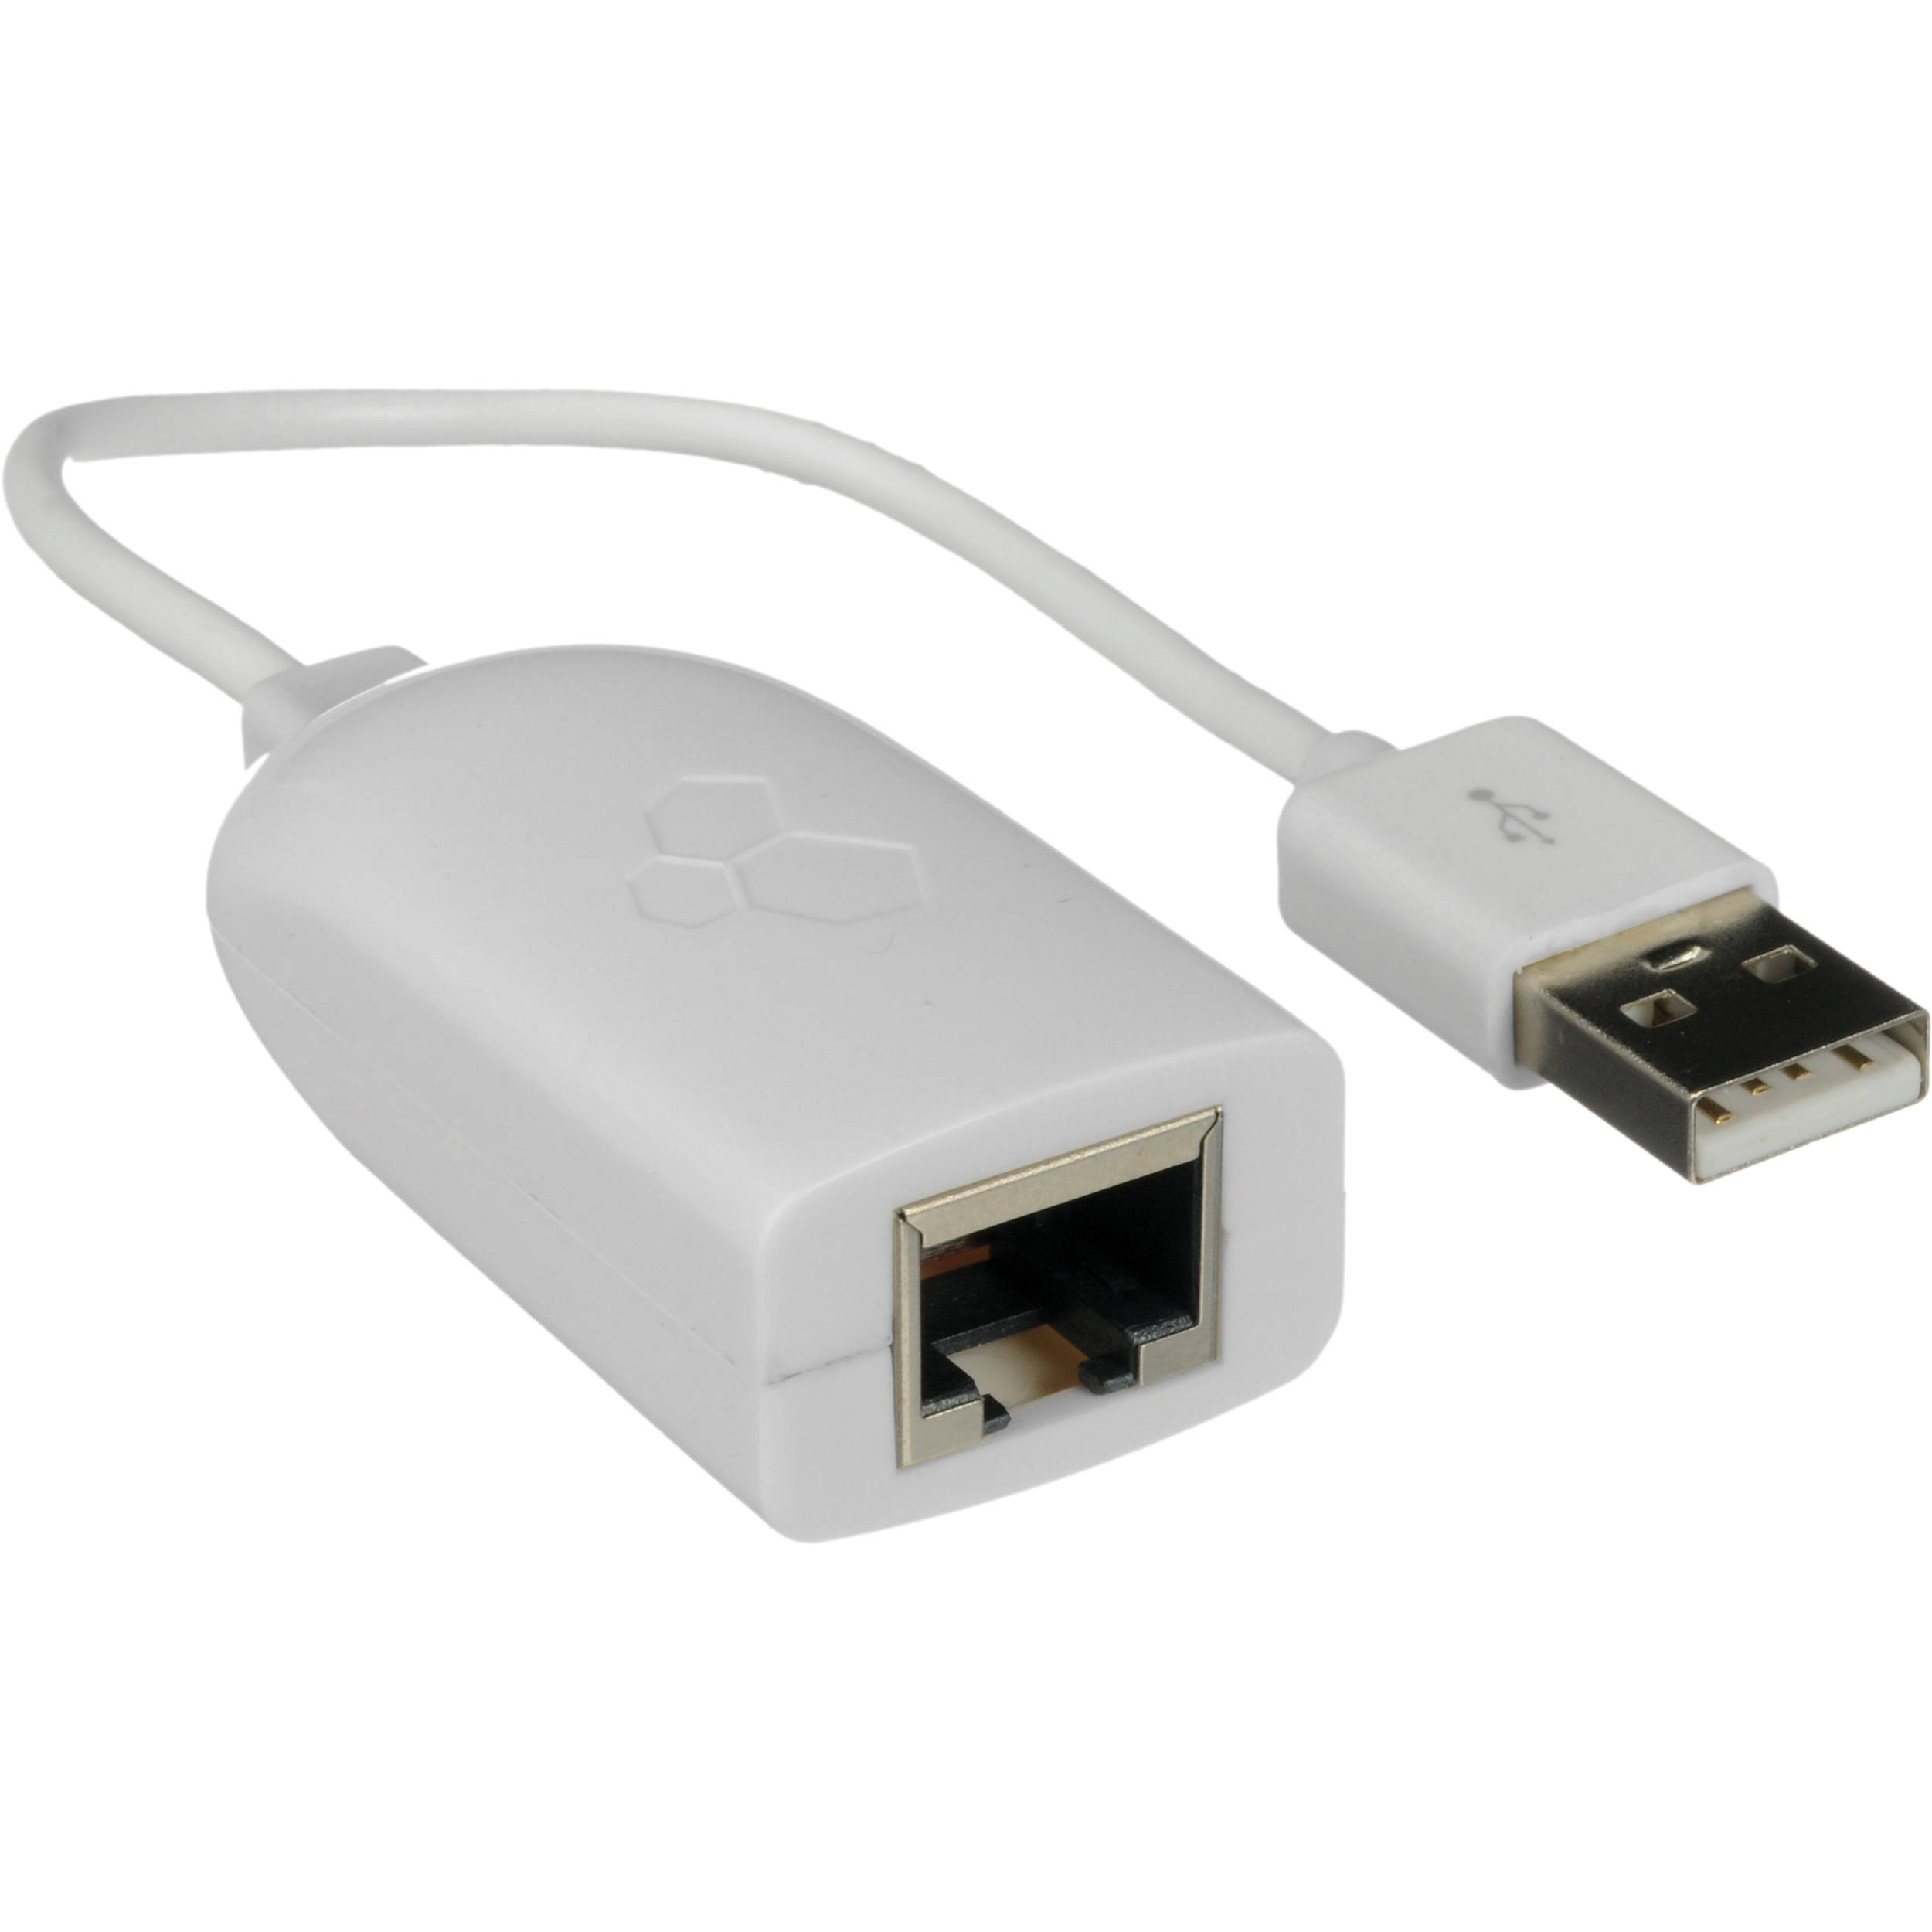 Usb to ethernet adapter for android